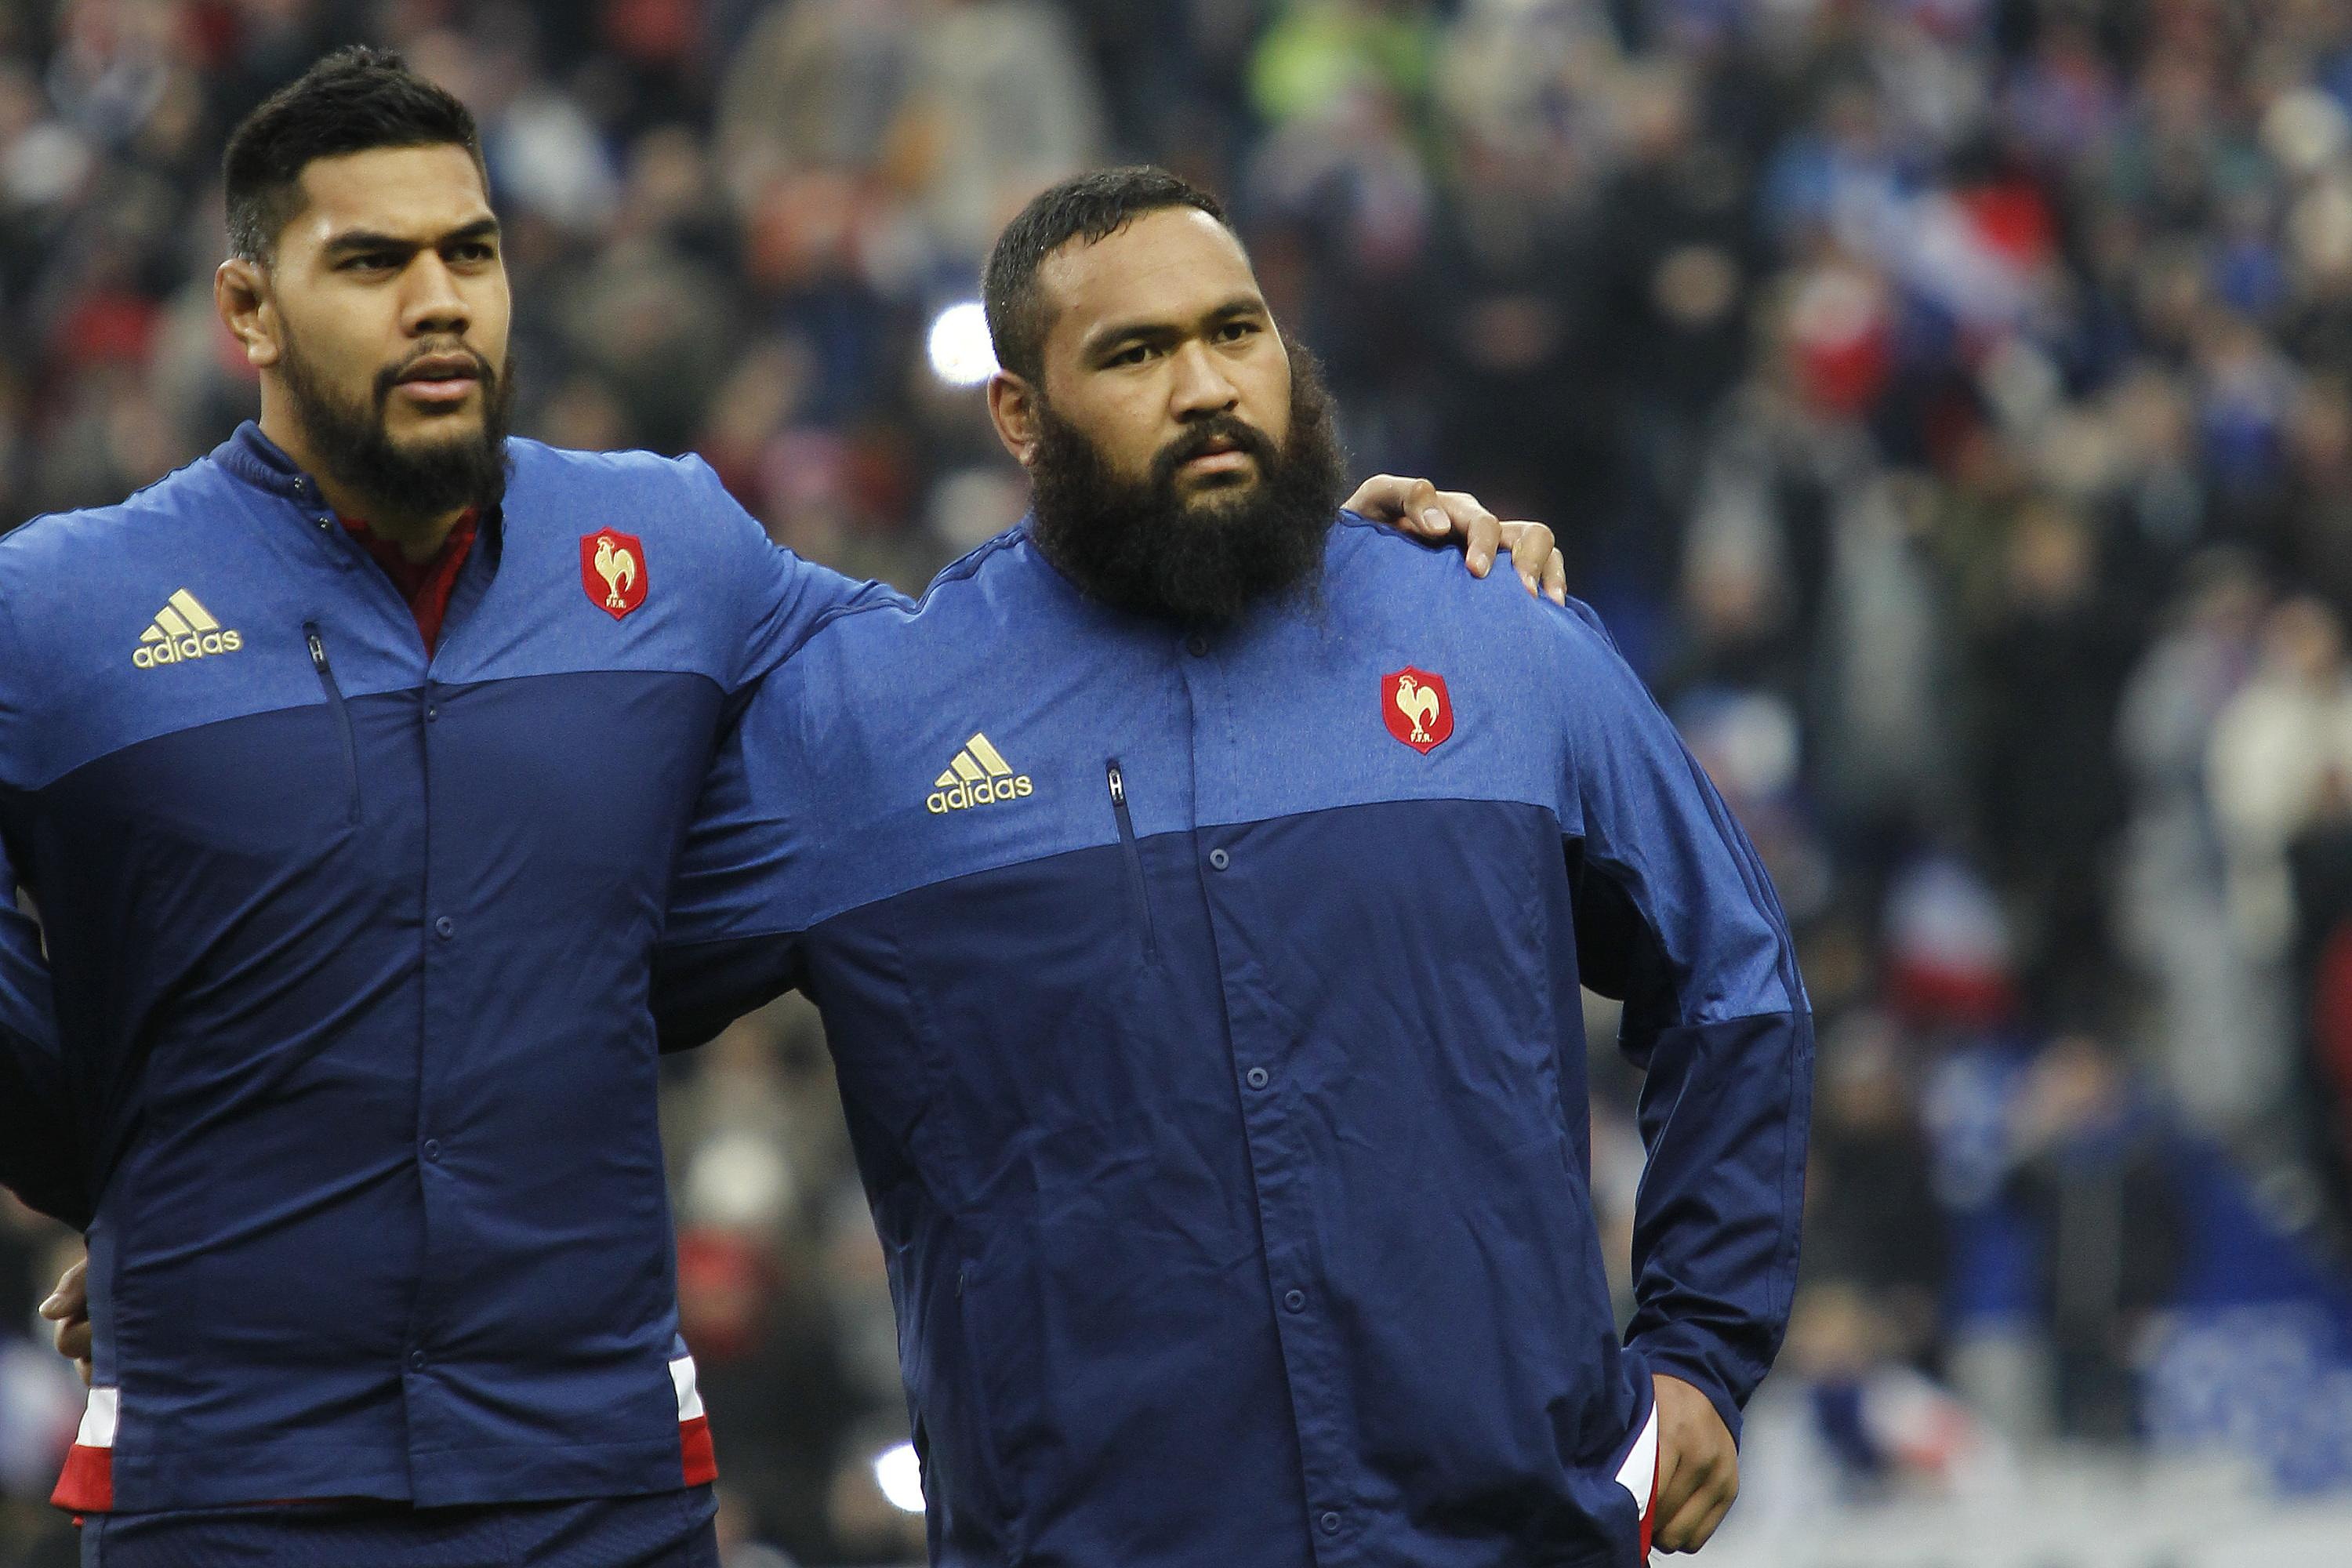 XV of France: Atonio and Taofifenua who continue, “a very good thing” according to Servat